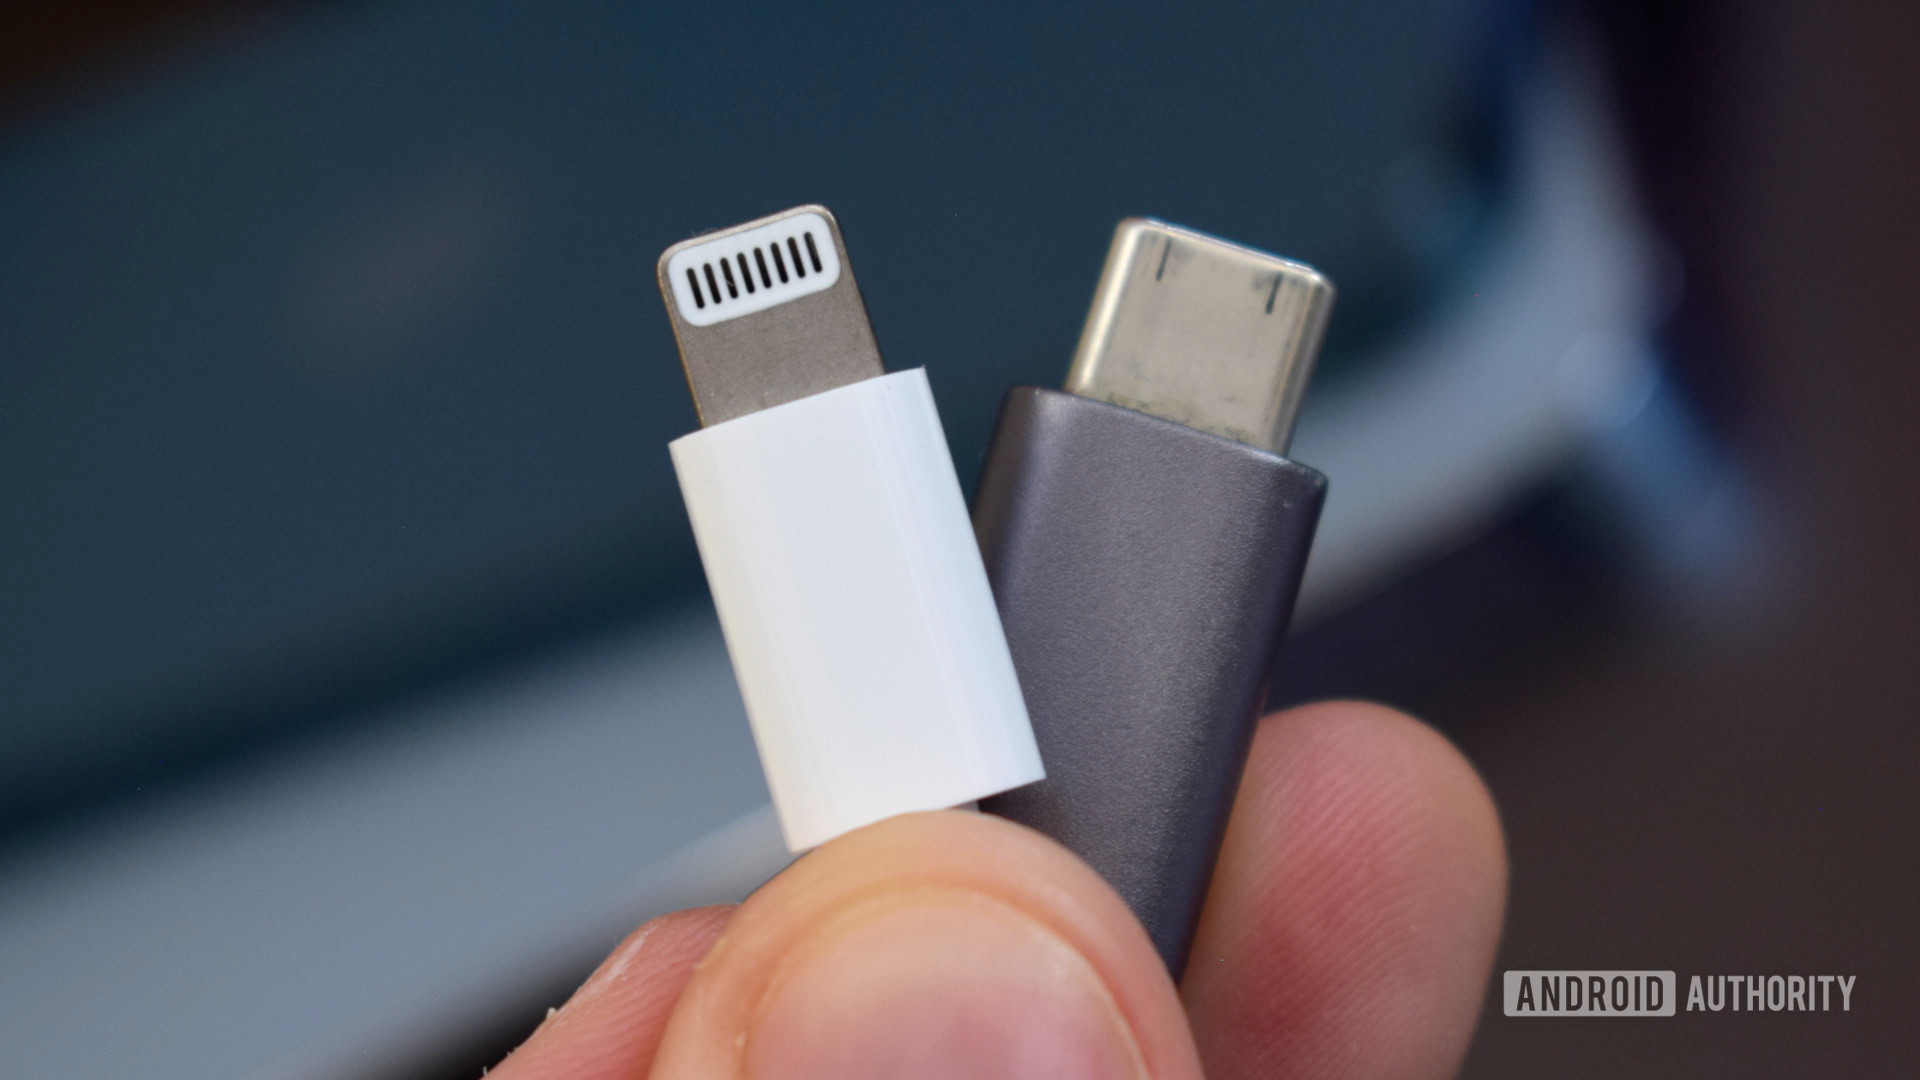 USB-C vs Lightning: is actually the best? - Android Authority